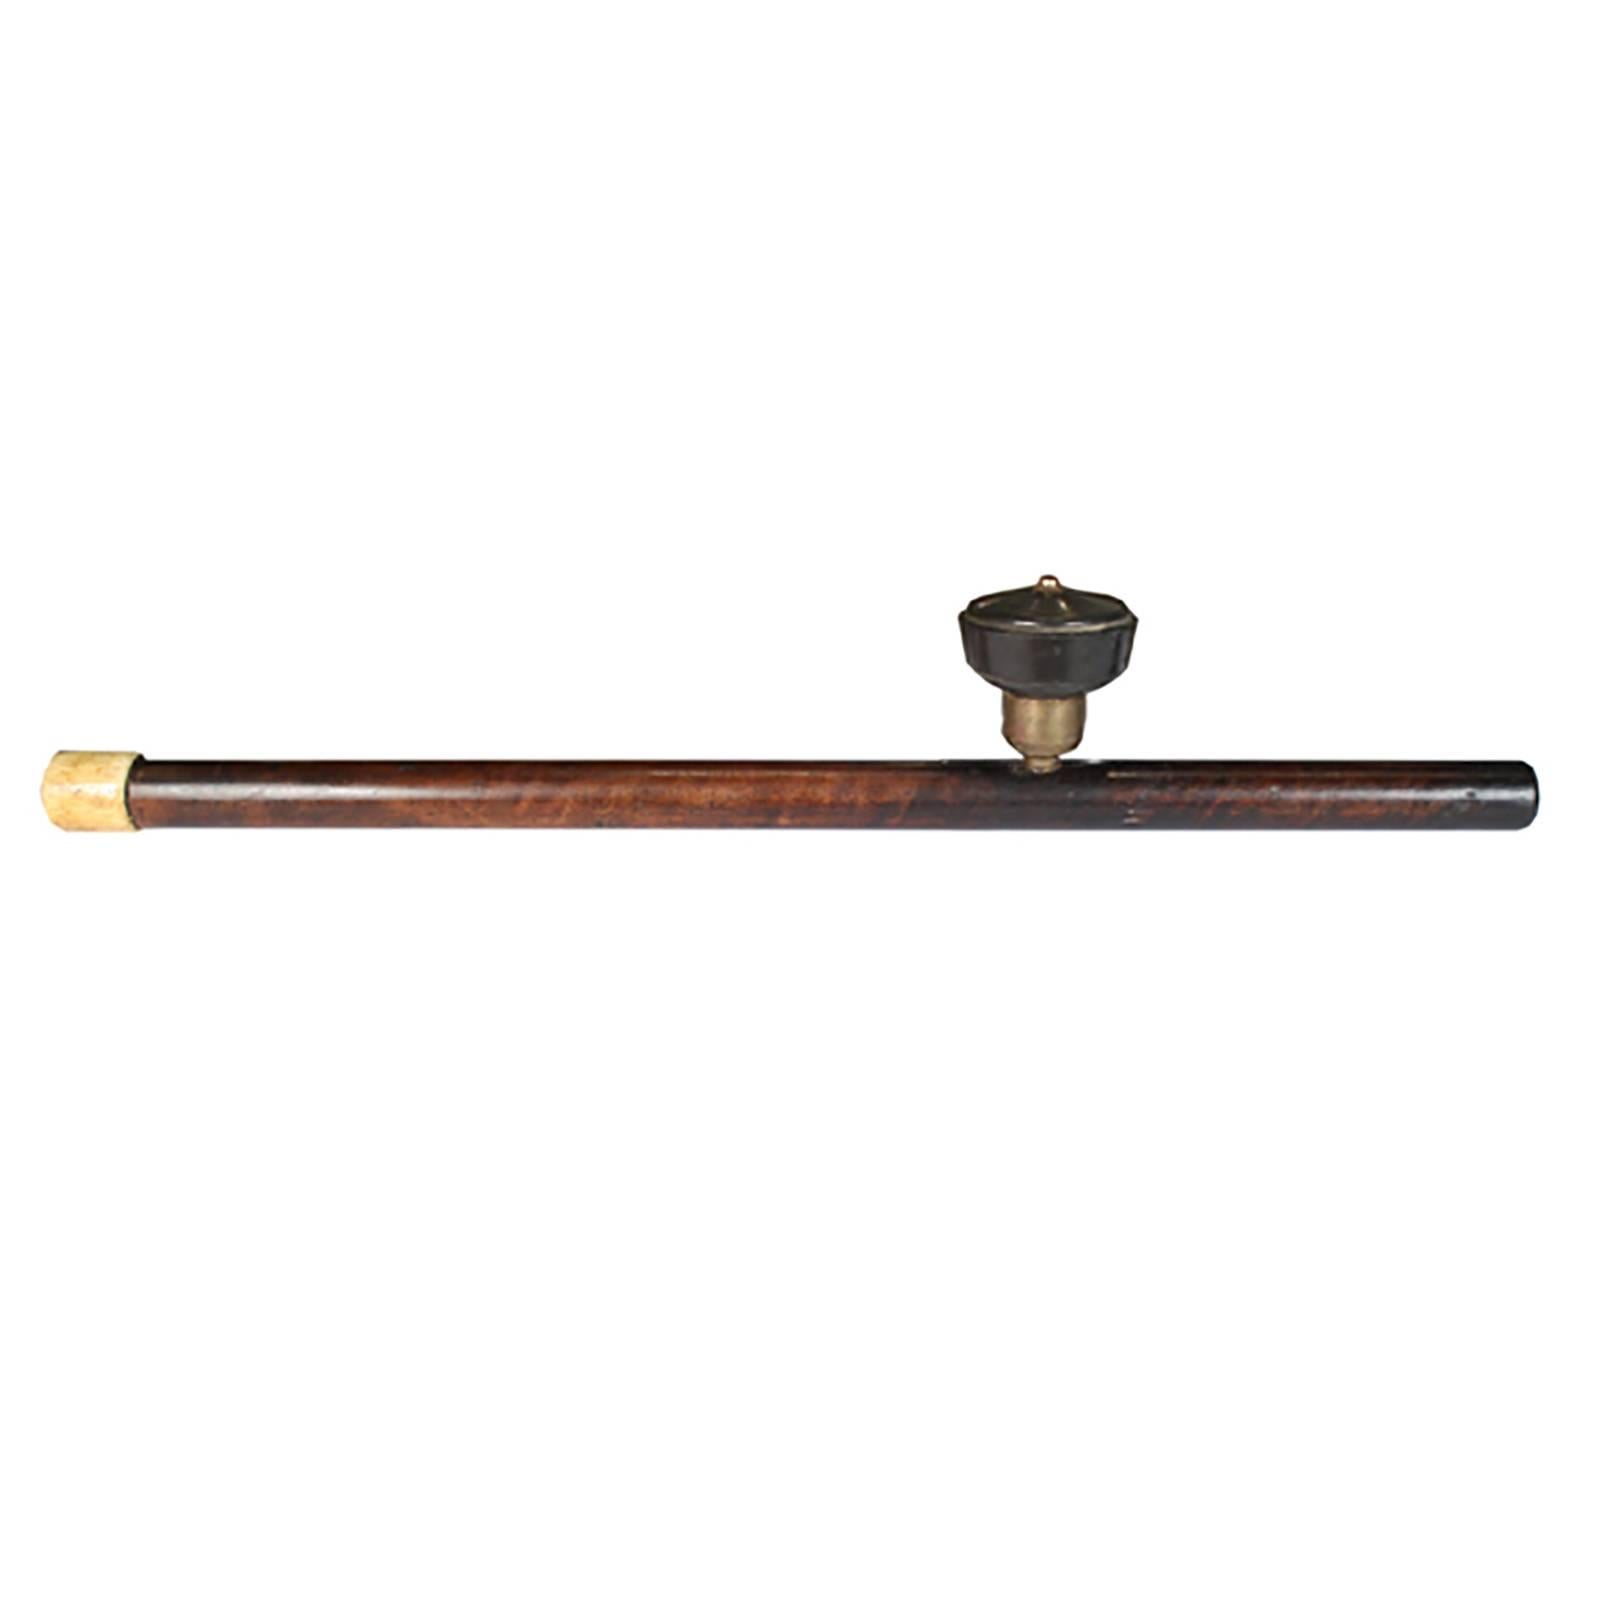 This handcrafted opium pipe is simple, elegant and finished in bone. It rests on a custom-made stand. Chinese culture had a longstanding love affair with all things opium beginning in the 8th century, when people began to use it as the cure for many